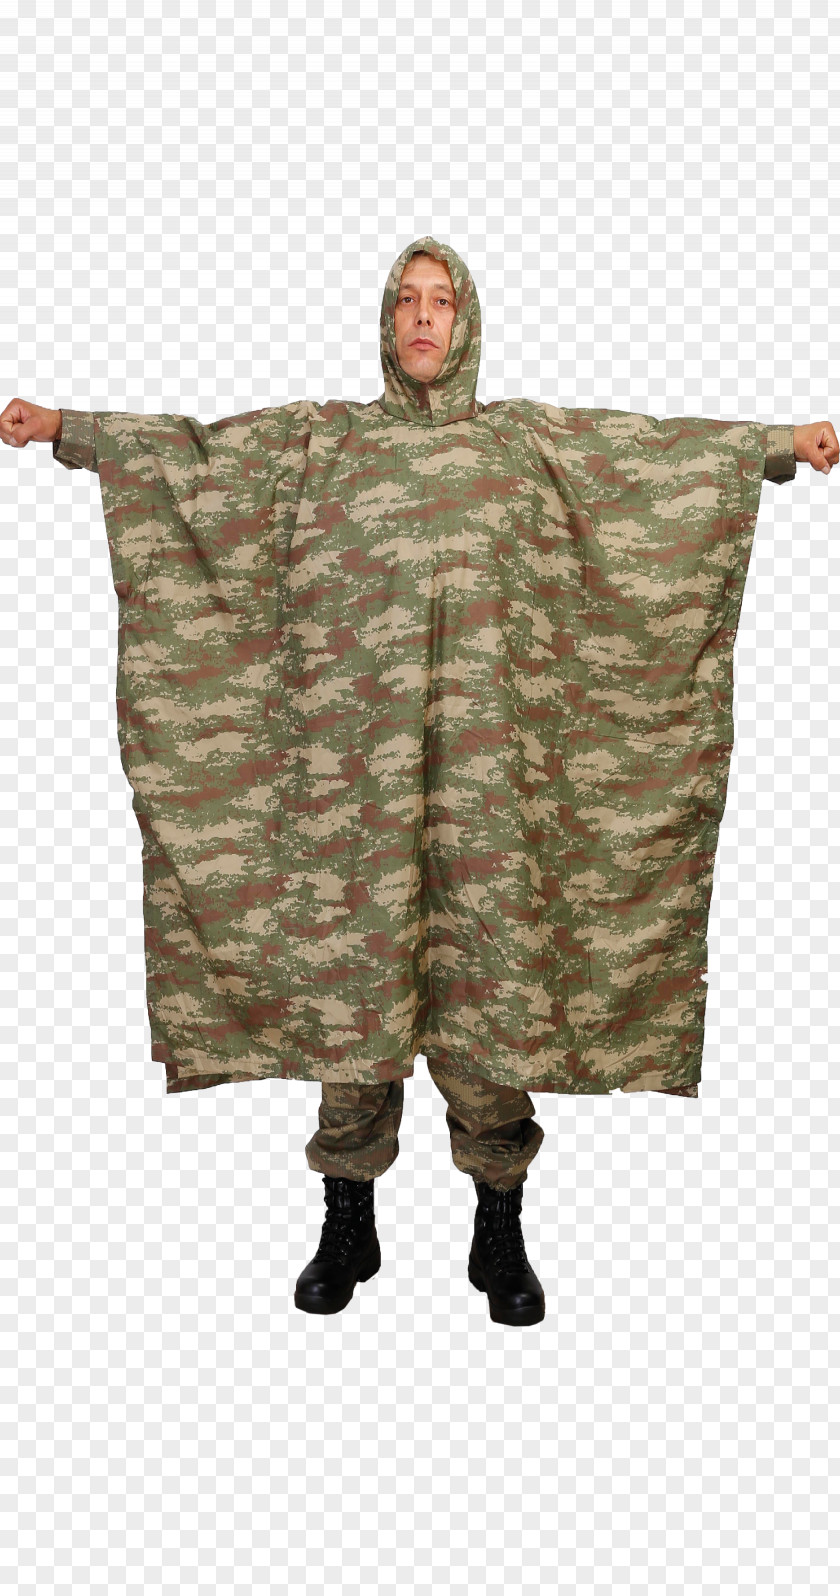 Military Camouflage Uniform Ripstop Textile PNG